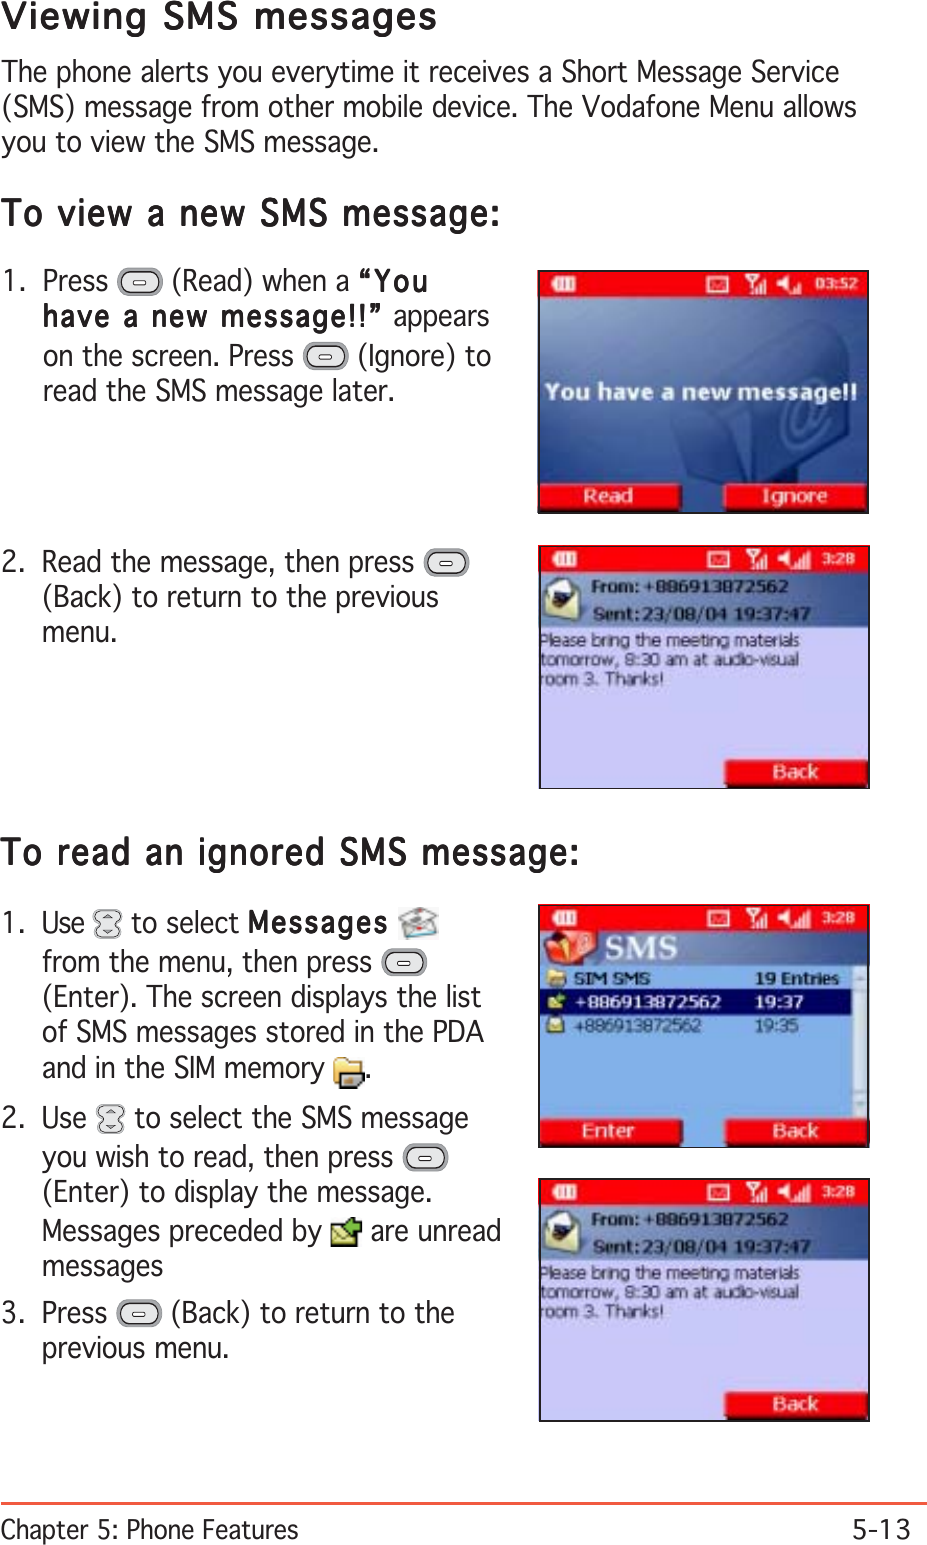 Chapter 5: Phone Features5-13Viewing SMS messagesViewing SMS messagesViewing SMS messagesViewing SMS messagesViewing SMS messagesThe phone alerts you everytime it receives a Short Message Service(SMS) message from other mobile device. The Vodafone Menu allowsyou to view the SMS message.To view a new SMS message:To view a new SMS message:To view a new SMS message:To view a new SMS message:To view a new SMS message:1. Press   (Read) when a “You“You“You“You“Youhave a new message!!” have a new message!!” have a new message!!” have a new message!!” have a new message!!” appearson the screen. Press   (Ignore) toread the SMS message later.2. Read the message, then press (Back) to return to the previousmenu.To read an ignored SMS message:To read an ignored SMS message:To read an ignored SMS message:To read an ignored SMS message:To read an ignored SMS message:1. Use   to select MessagesMessagesMessagesMessagesMessagesfrom the menu, then press (Enter). The screen displays the listof SMS messages stored in the PDAand in the SIM memory  .2. Use   to select the SMS messageyou wish to read, then press (Enter) to display the message.Messages preceded by   are unreadmessages3. Press   (Back) to return to theprevious menu.